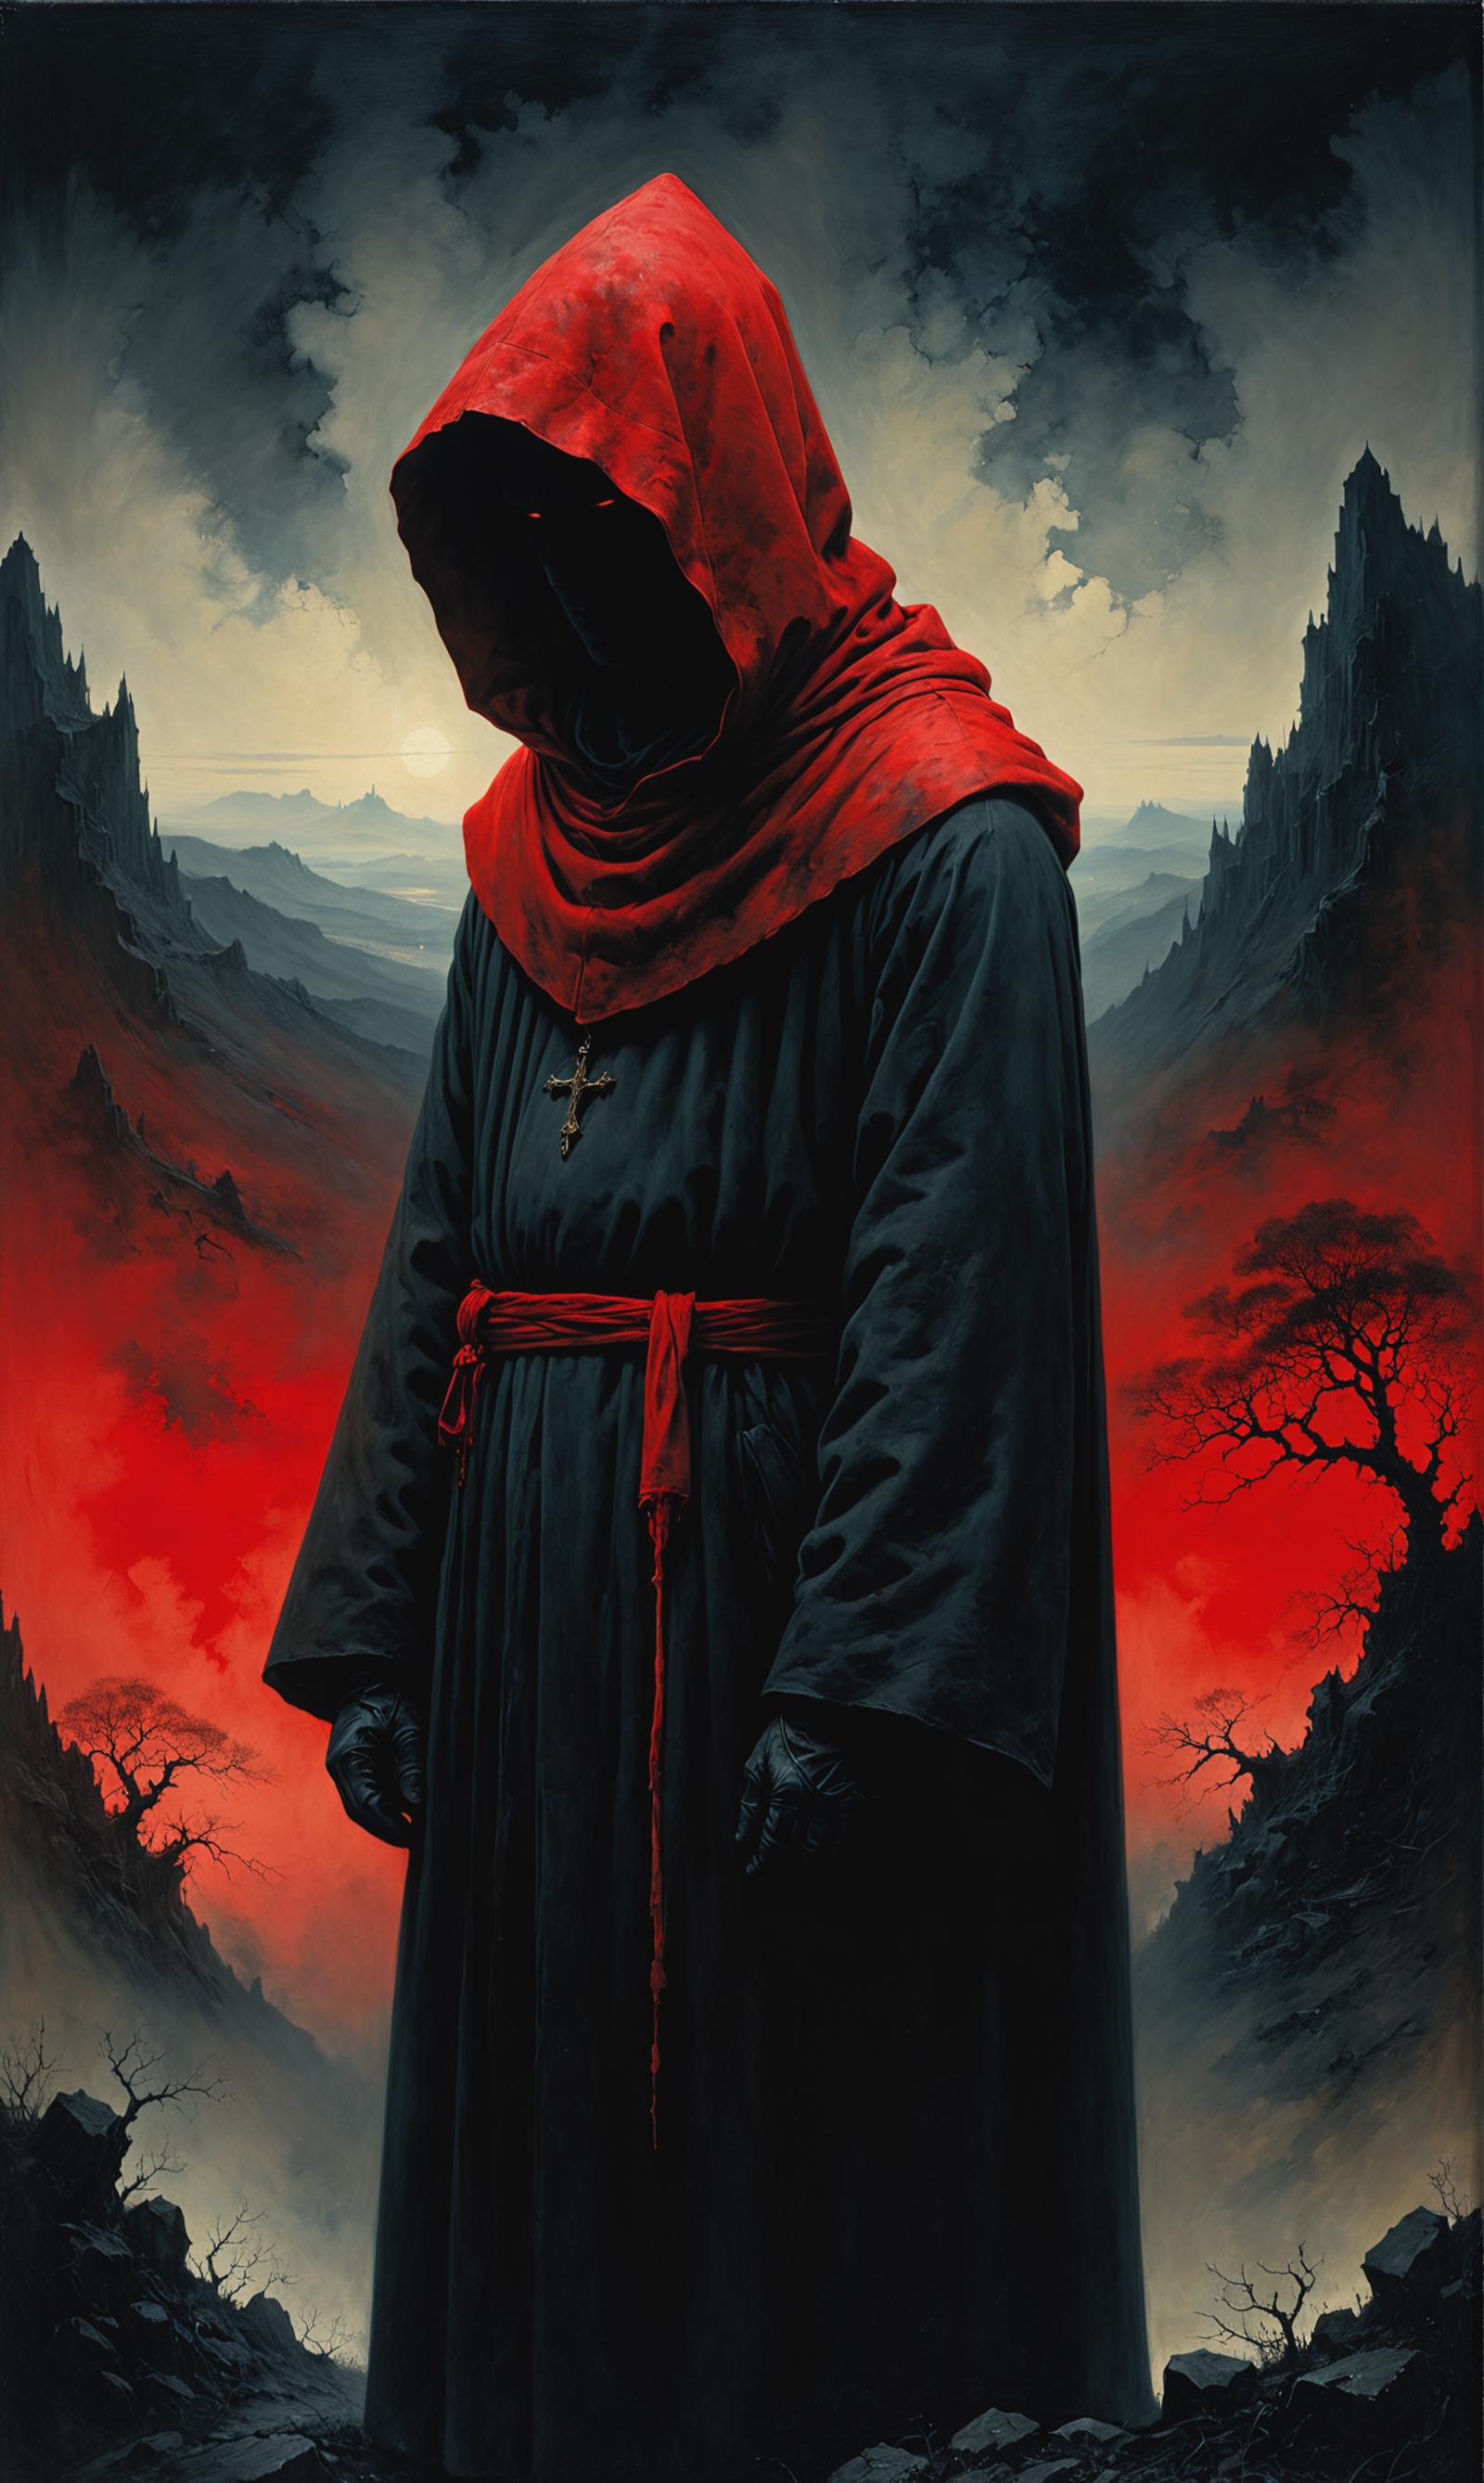 A Monk in Red Robes: A Dark and Dramatic Painting